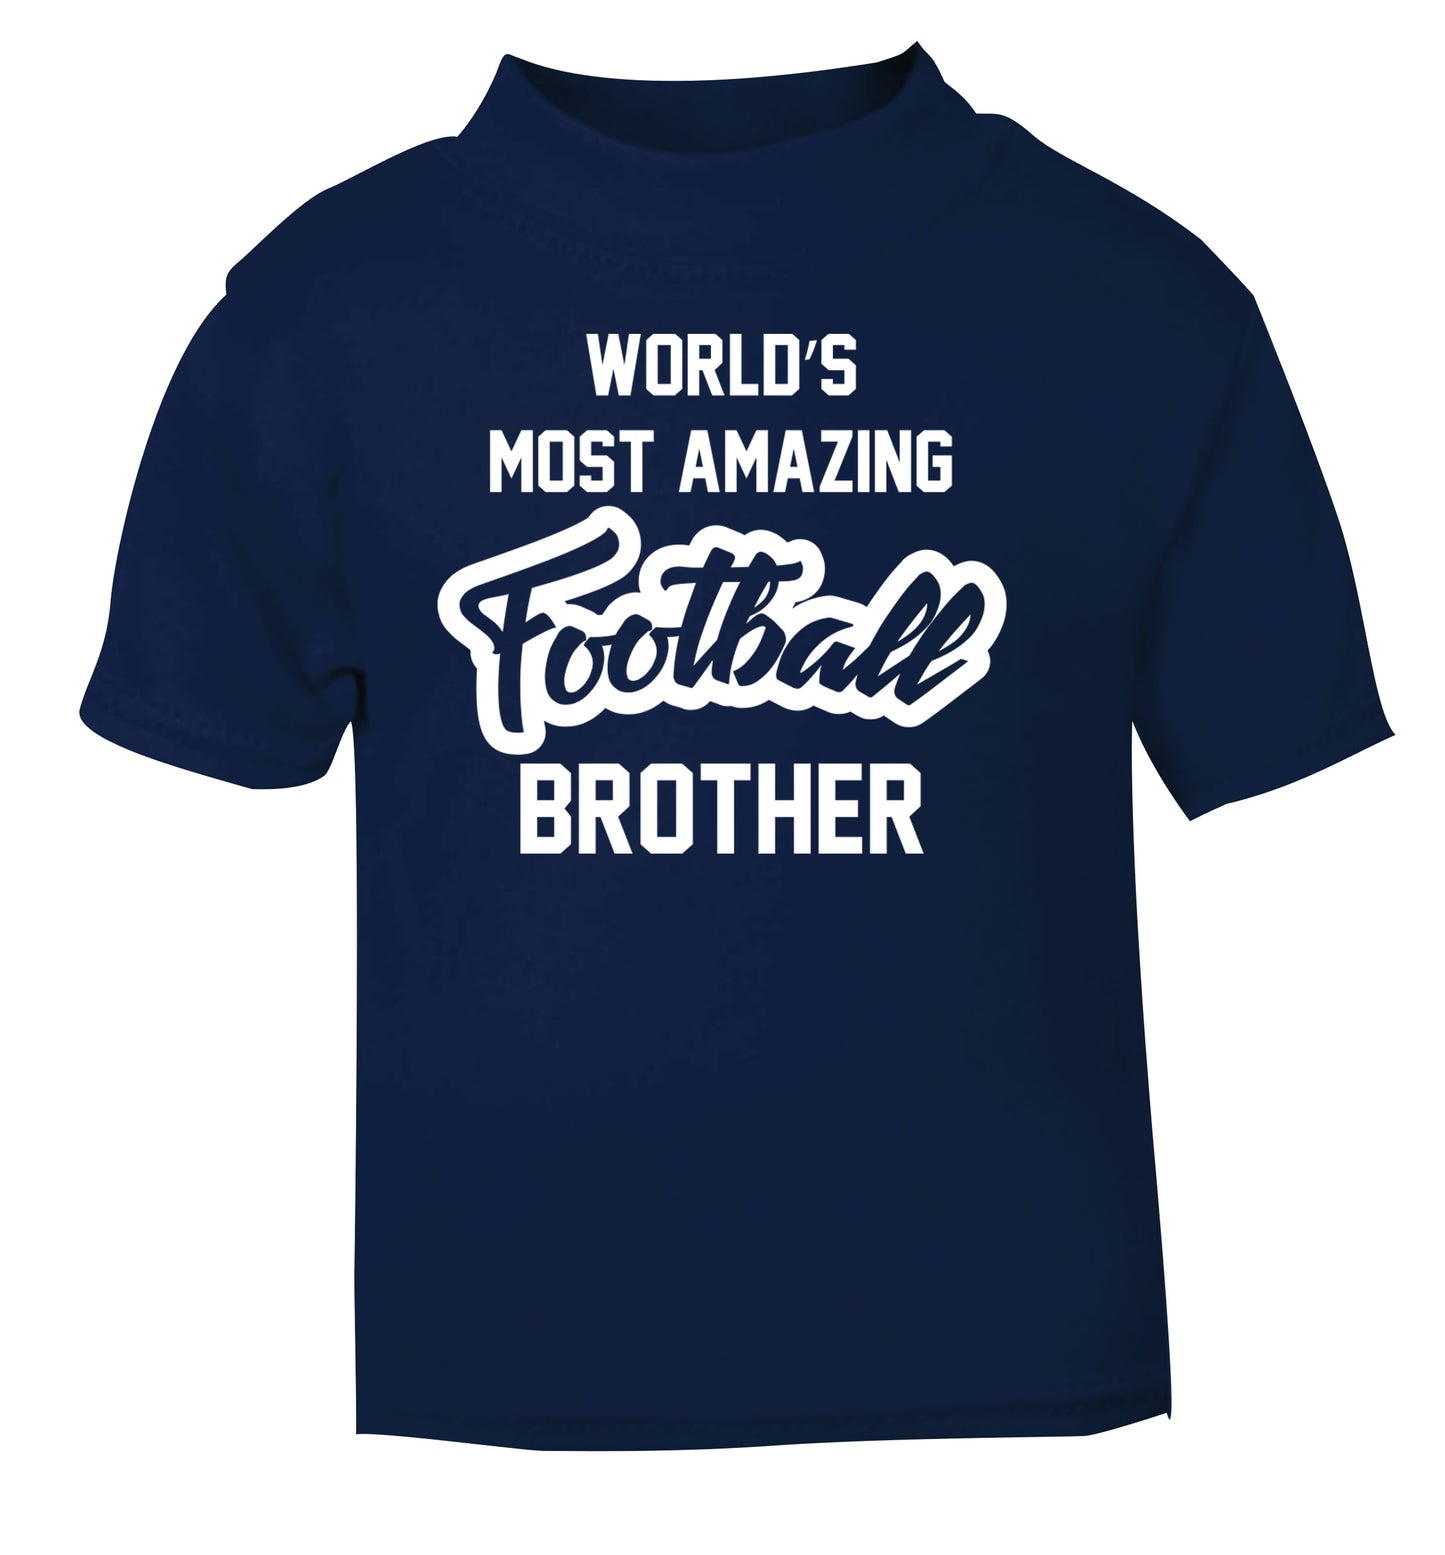 Worlds most amazing football brother navy Baby Toddler Tshirt 2 Years